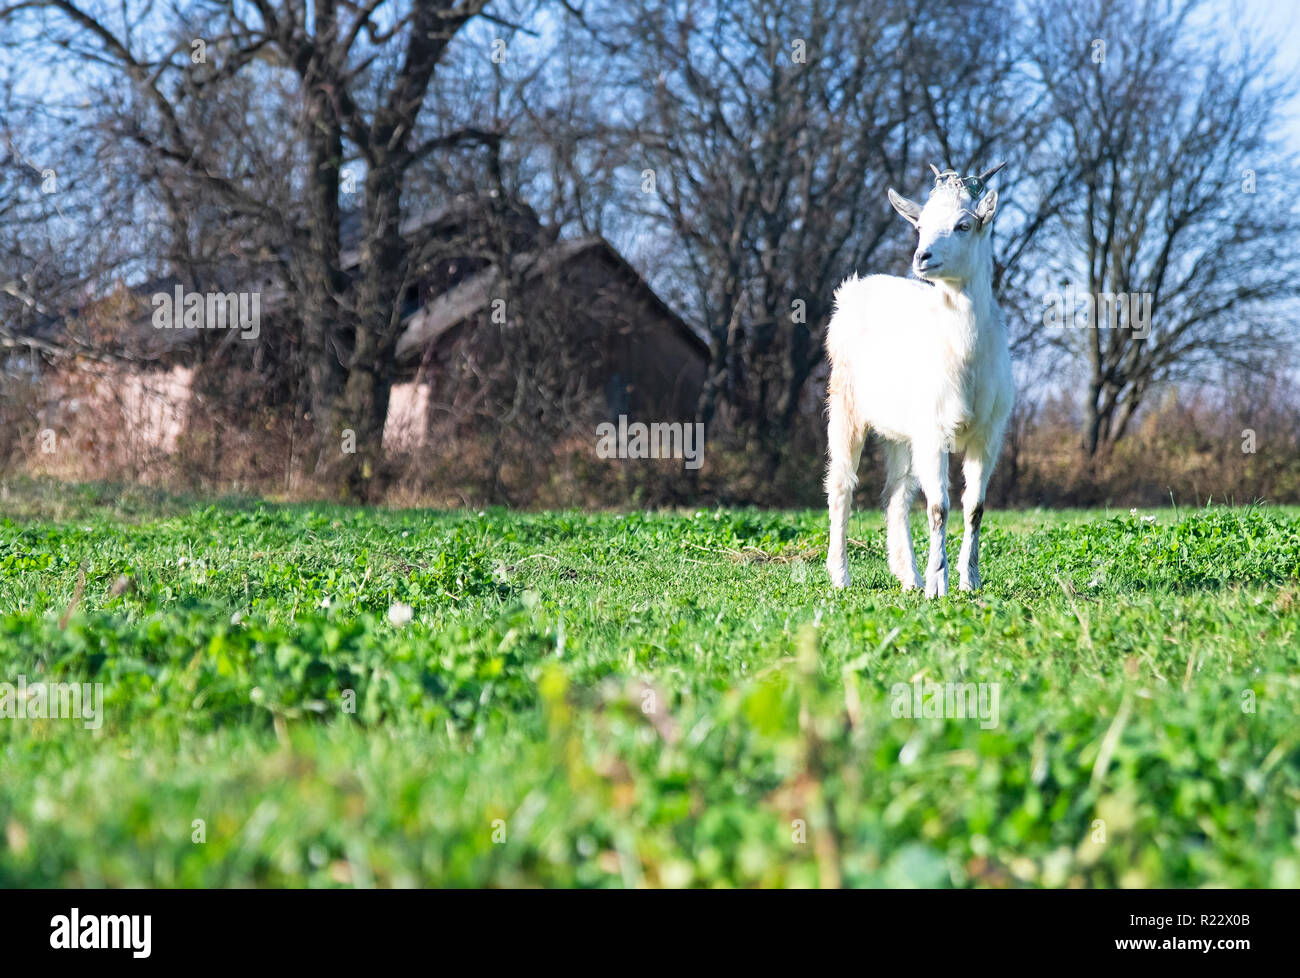 goat standing on background of a village house in green grass Stock Photo